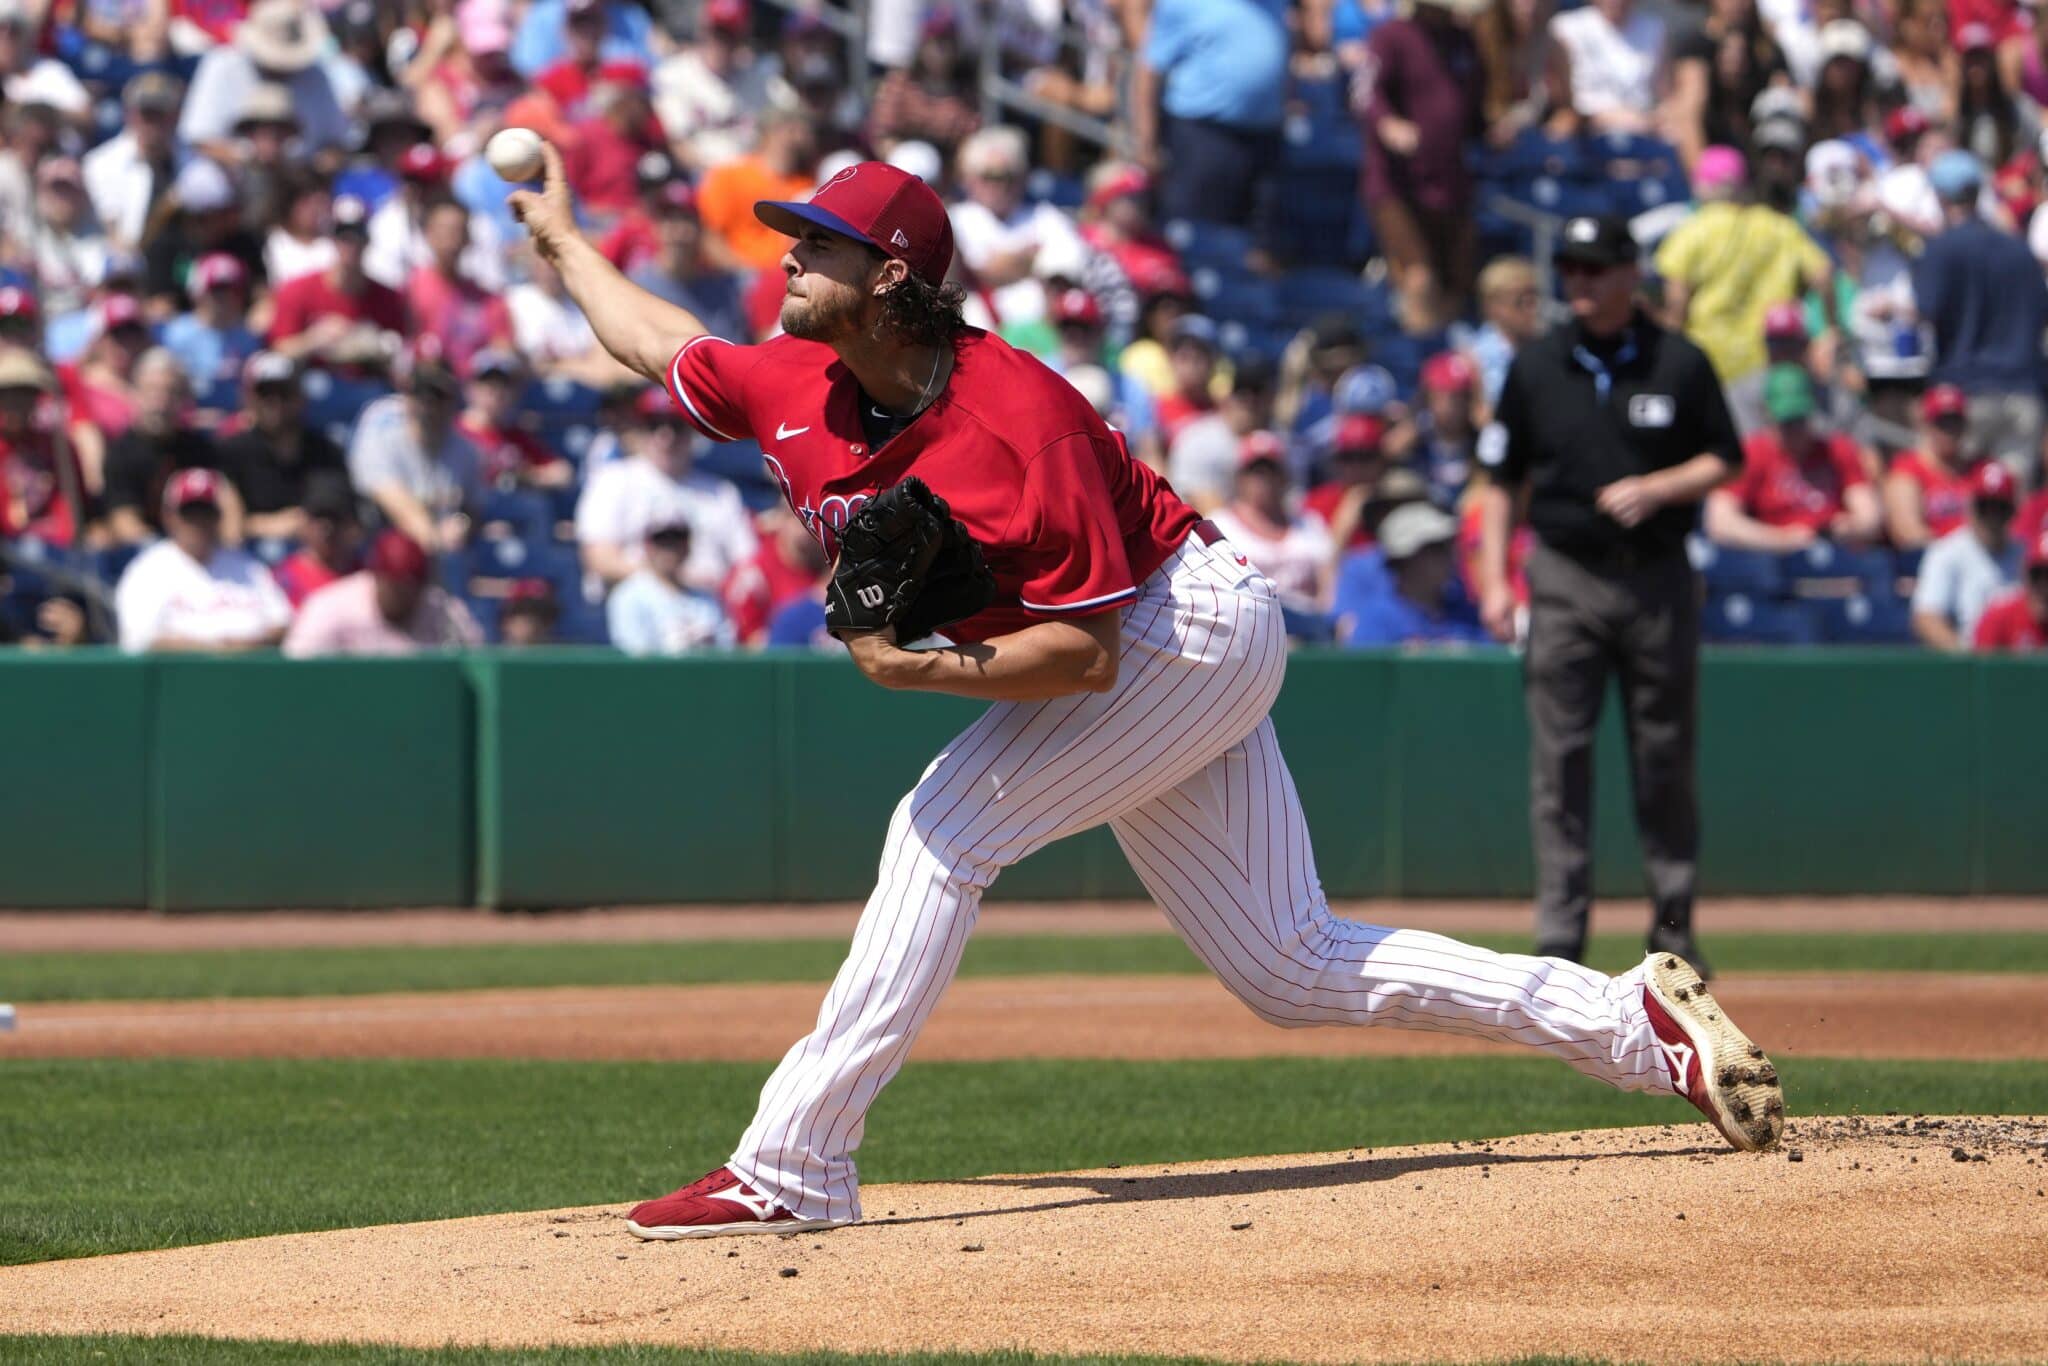 Aaron Nola’s Rough Spring Outing has him Looking for Pitch Clock Reps